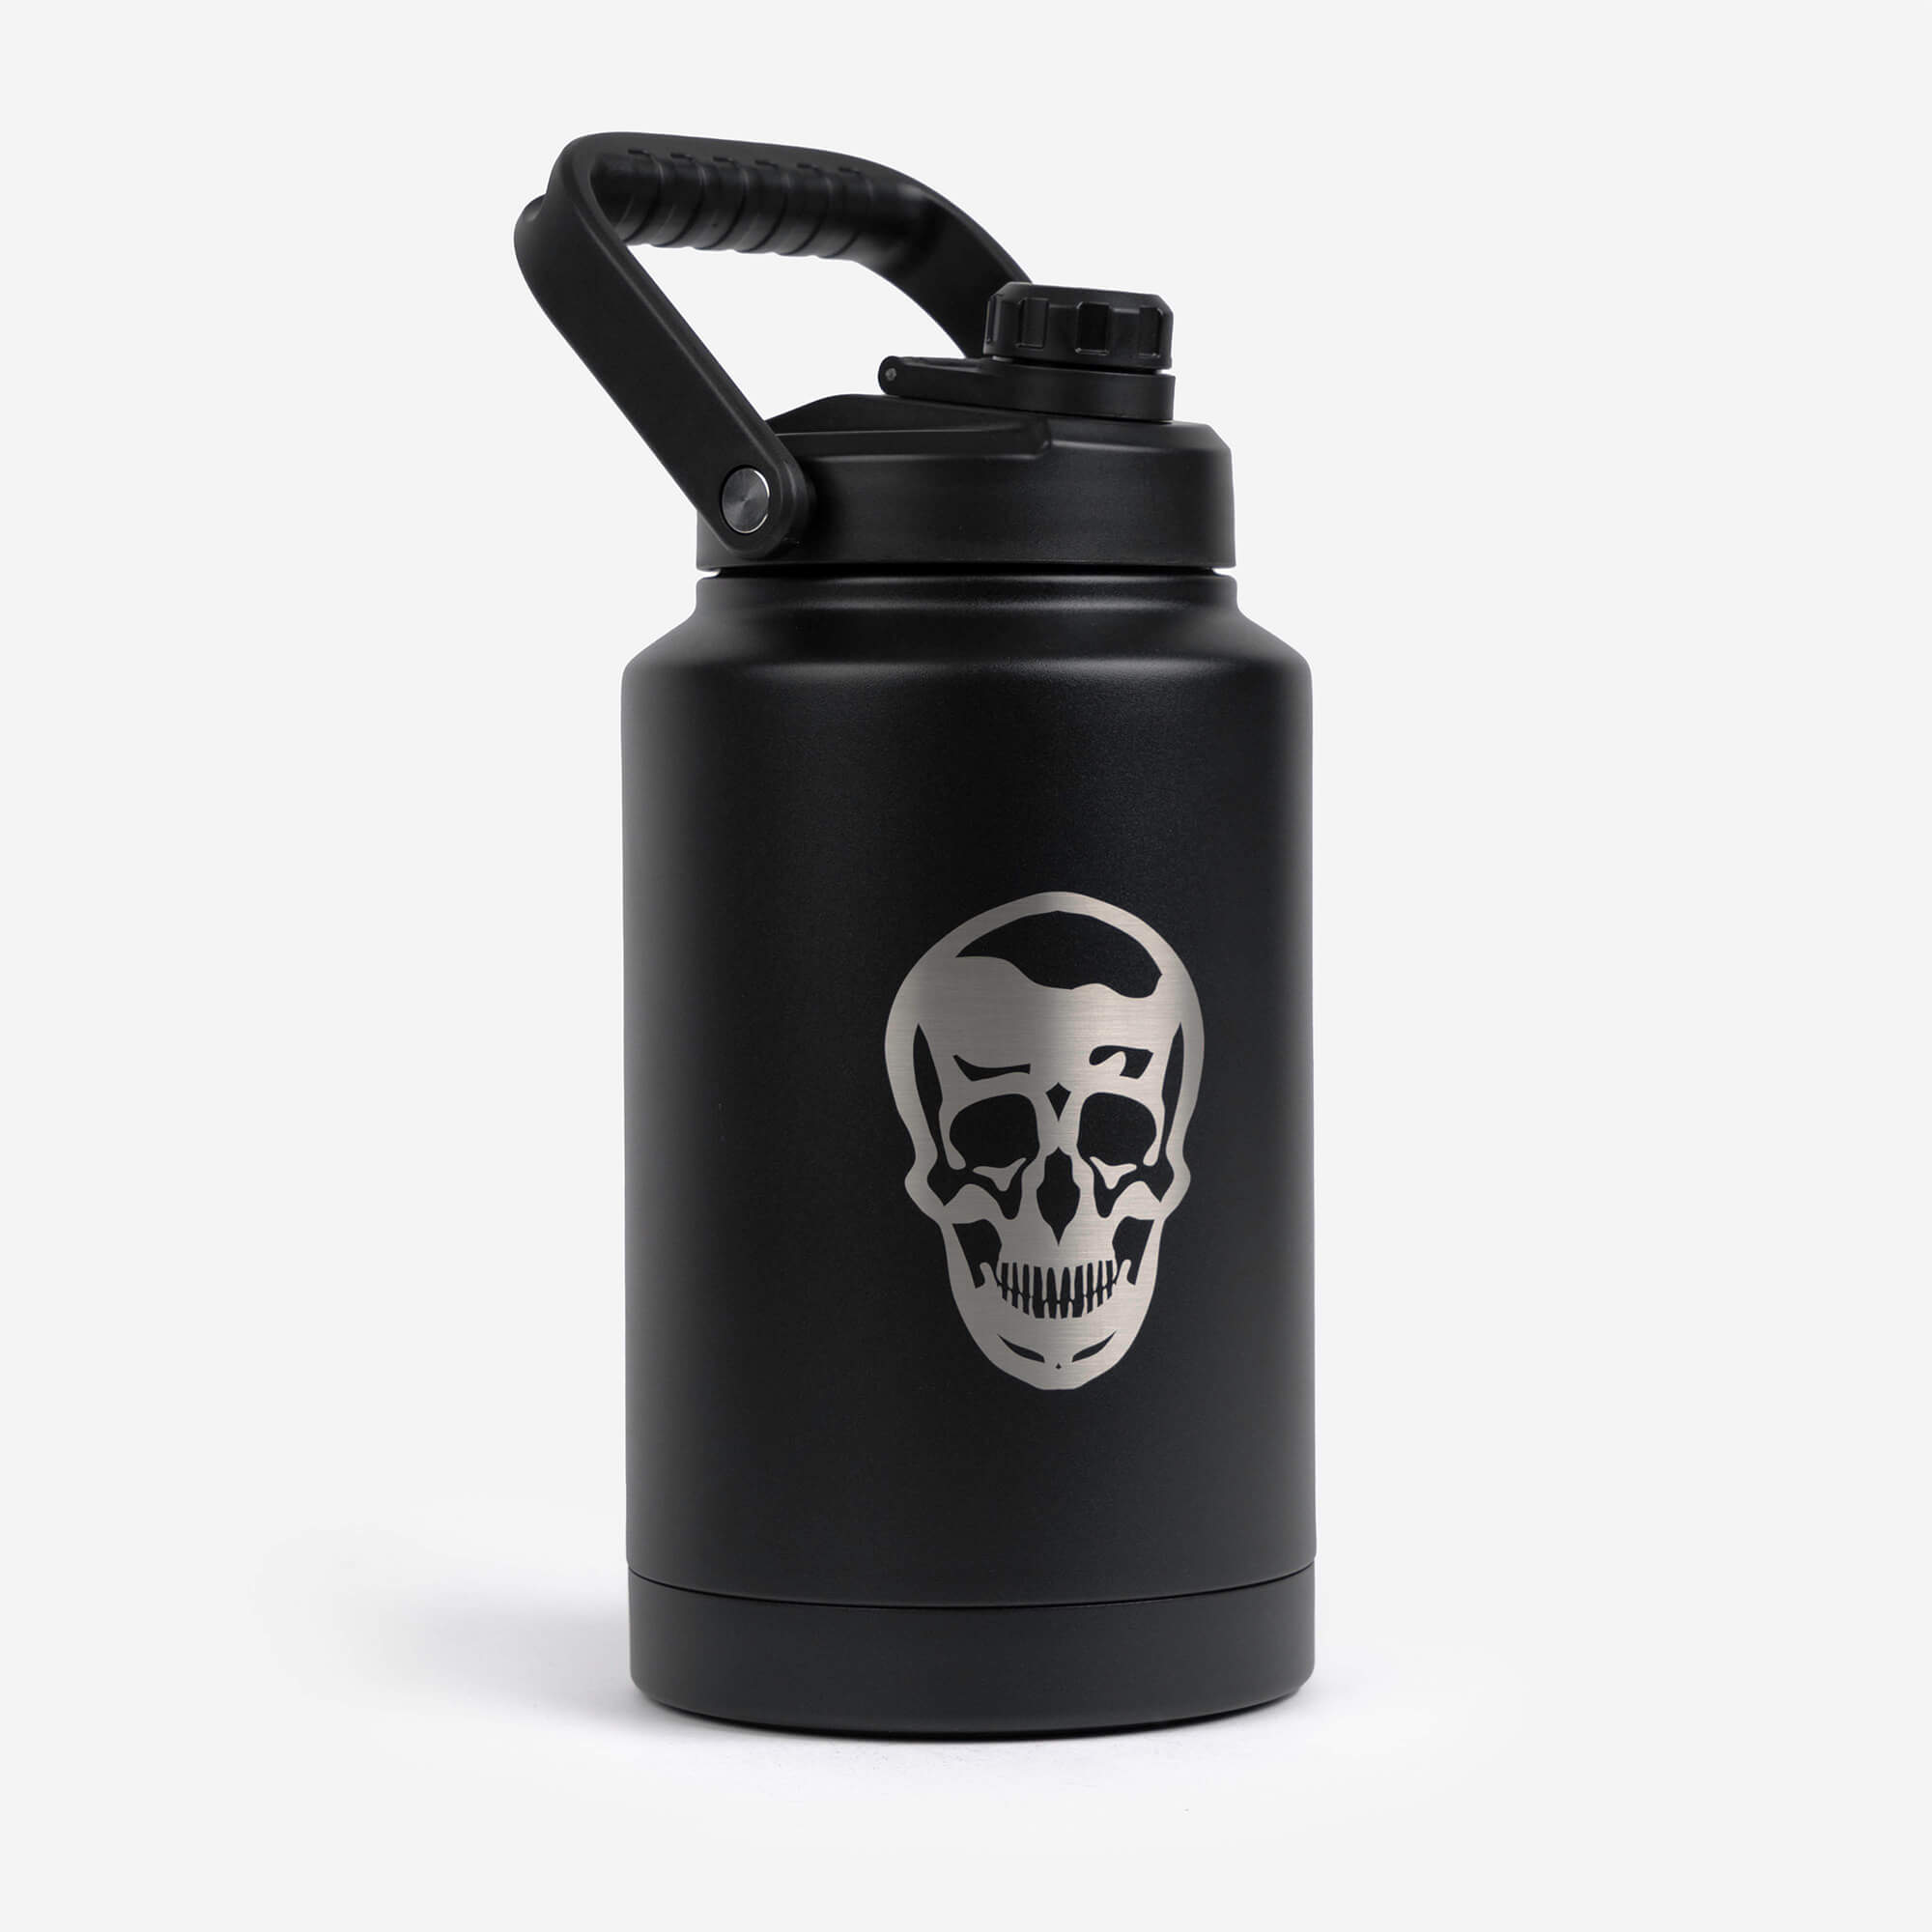  Teewarrior Gamer Water Bottle Nutritional Facts, Game Water  Bottle With Lid 12oz 18oz 32oz Novelty Game Lovers Gifts Skull Water Bottle  For Gamers Gaming Water Bottles For Boys Teen Dad Streammer 